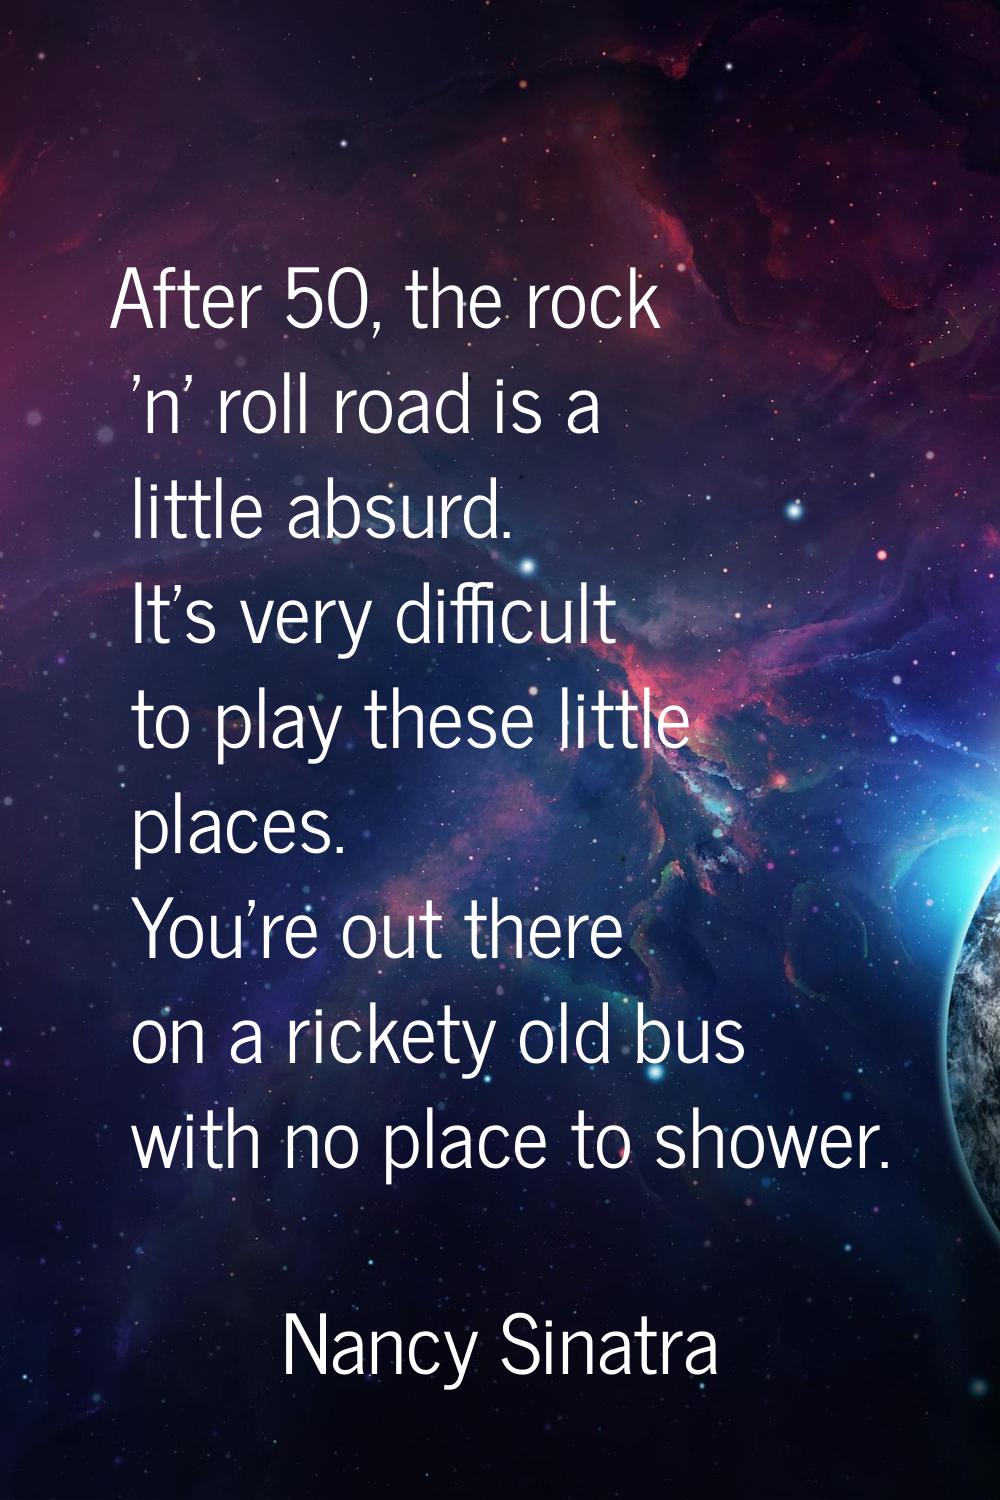 After 50, the rock 'n' roll road is a little absurd. It's very difficult to play these little place